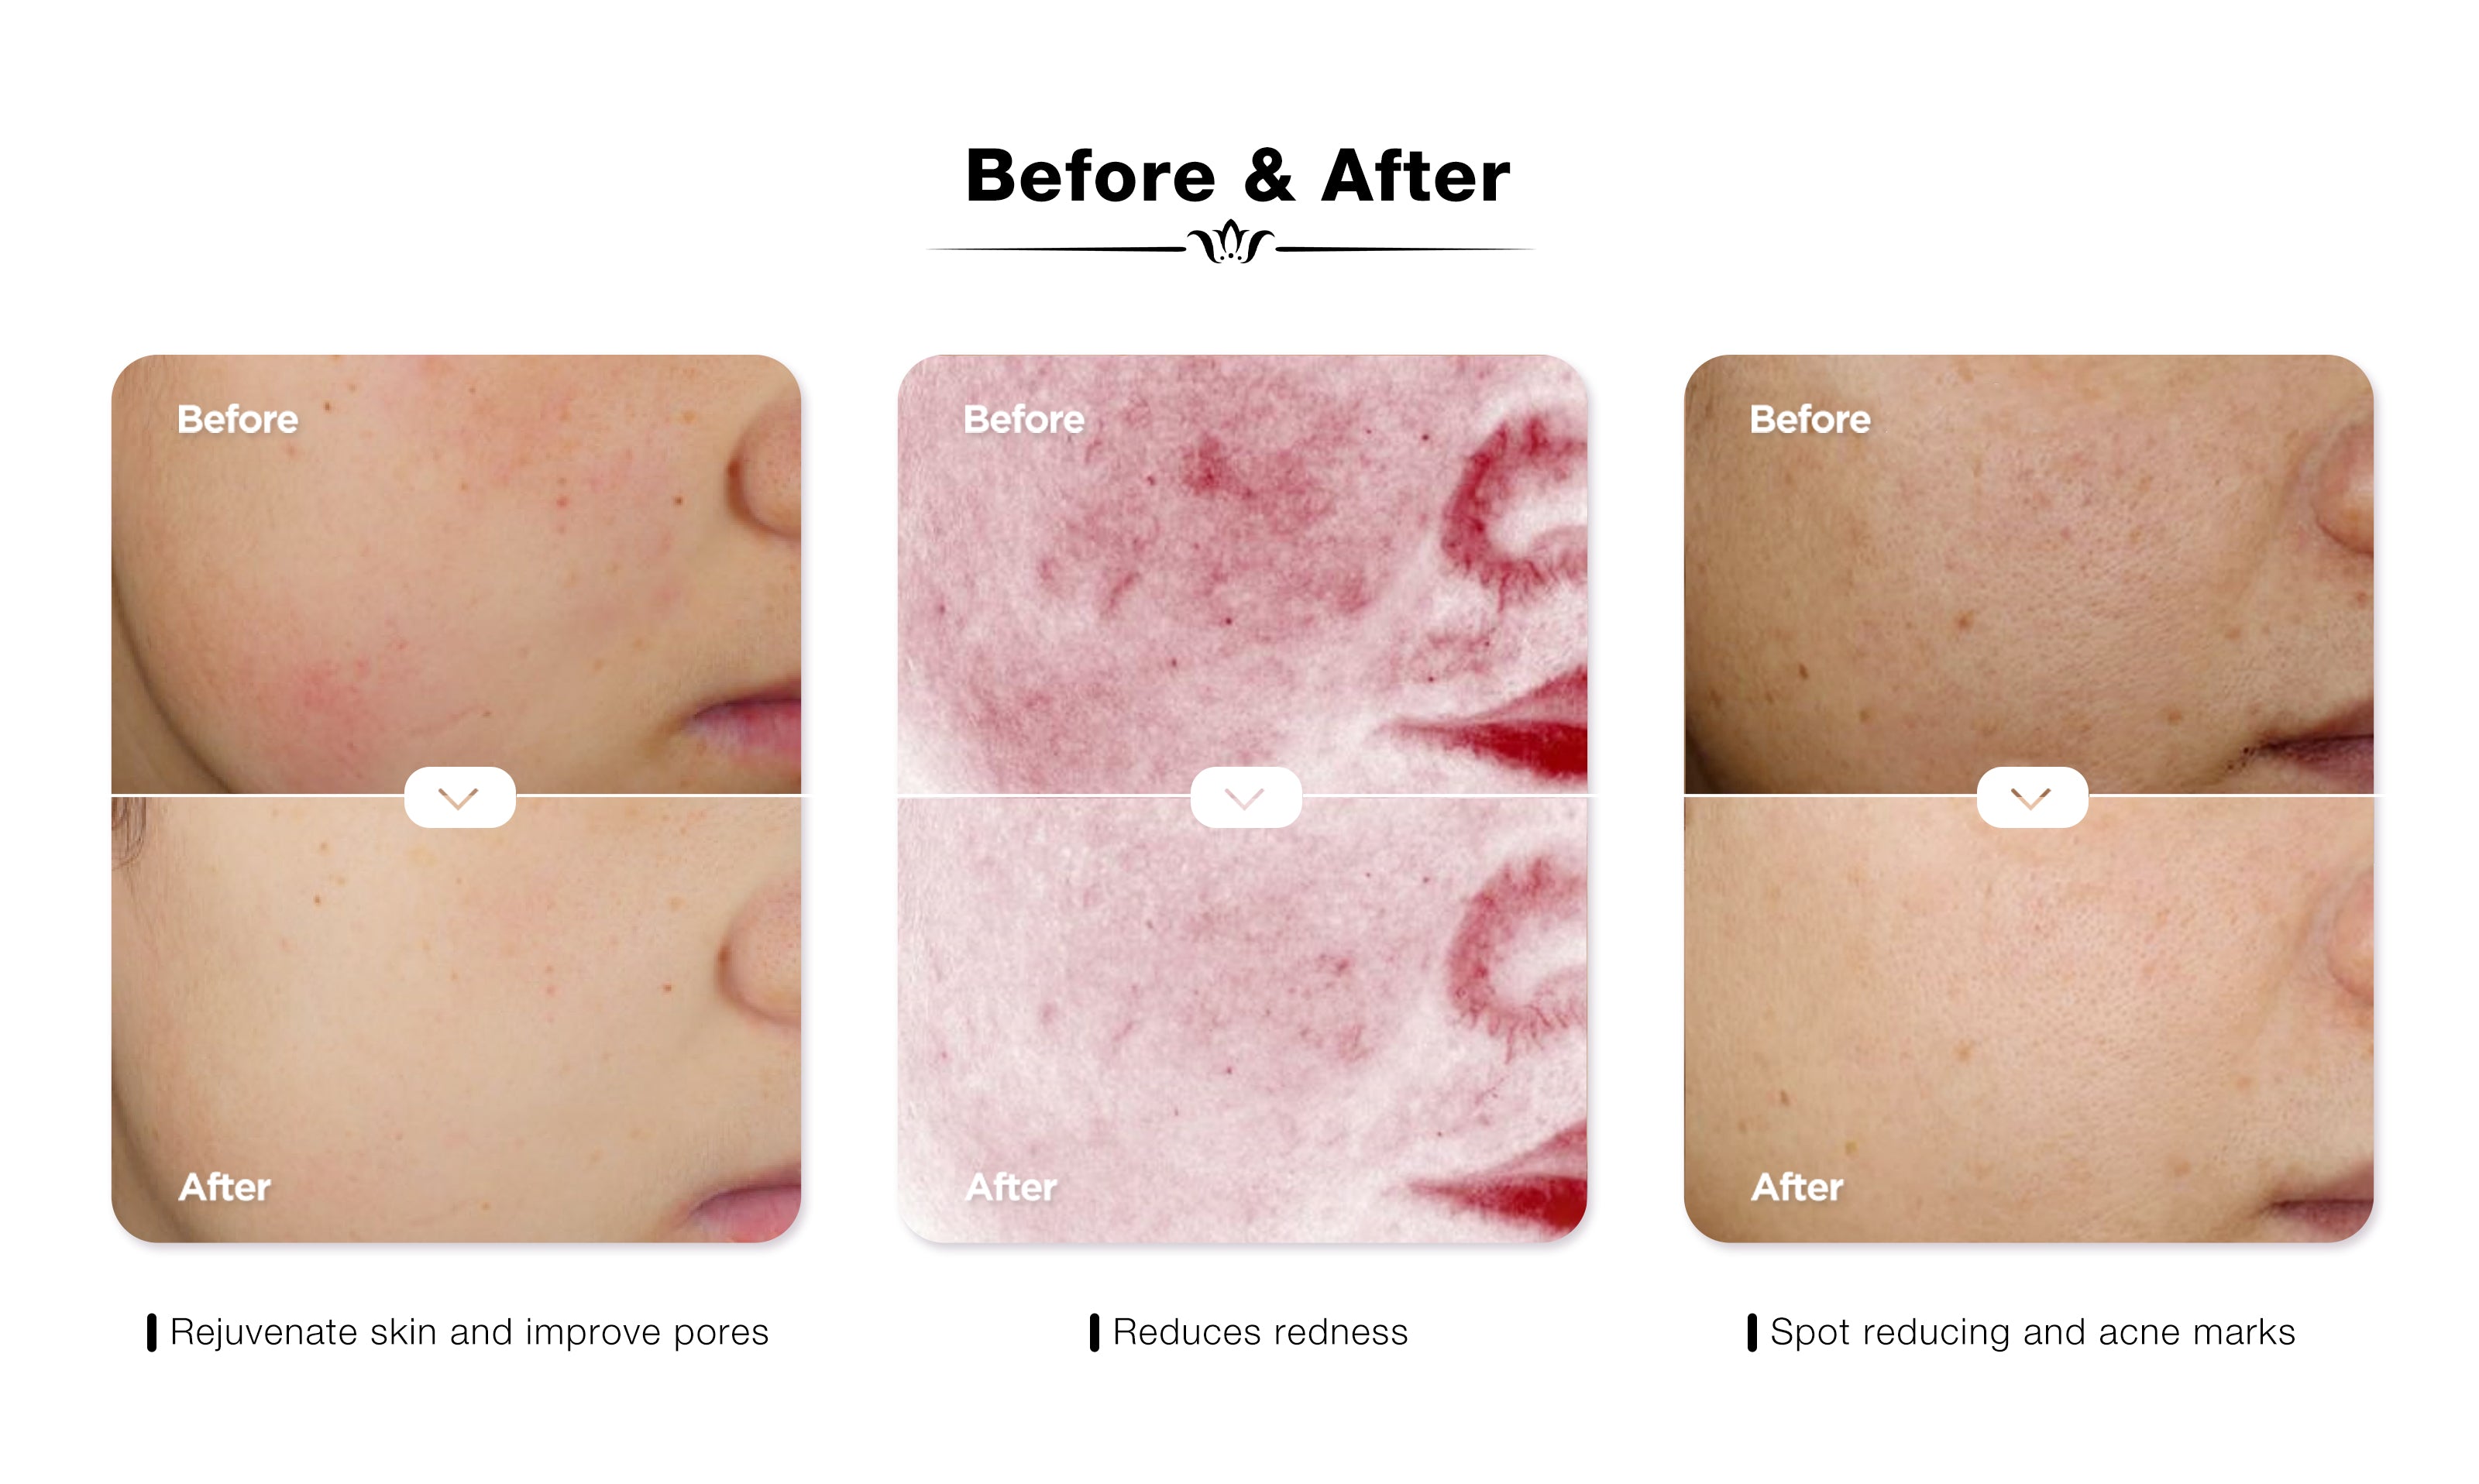 Before and after comparison images using JOVS Blacken PRO DPL Photorejuvenation Skincare Device: skin rejuvenation and pore improvement, redness reduction, and spots and acne marks fading.